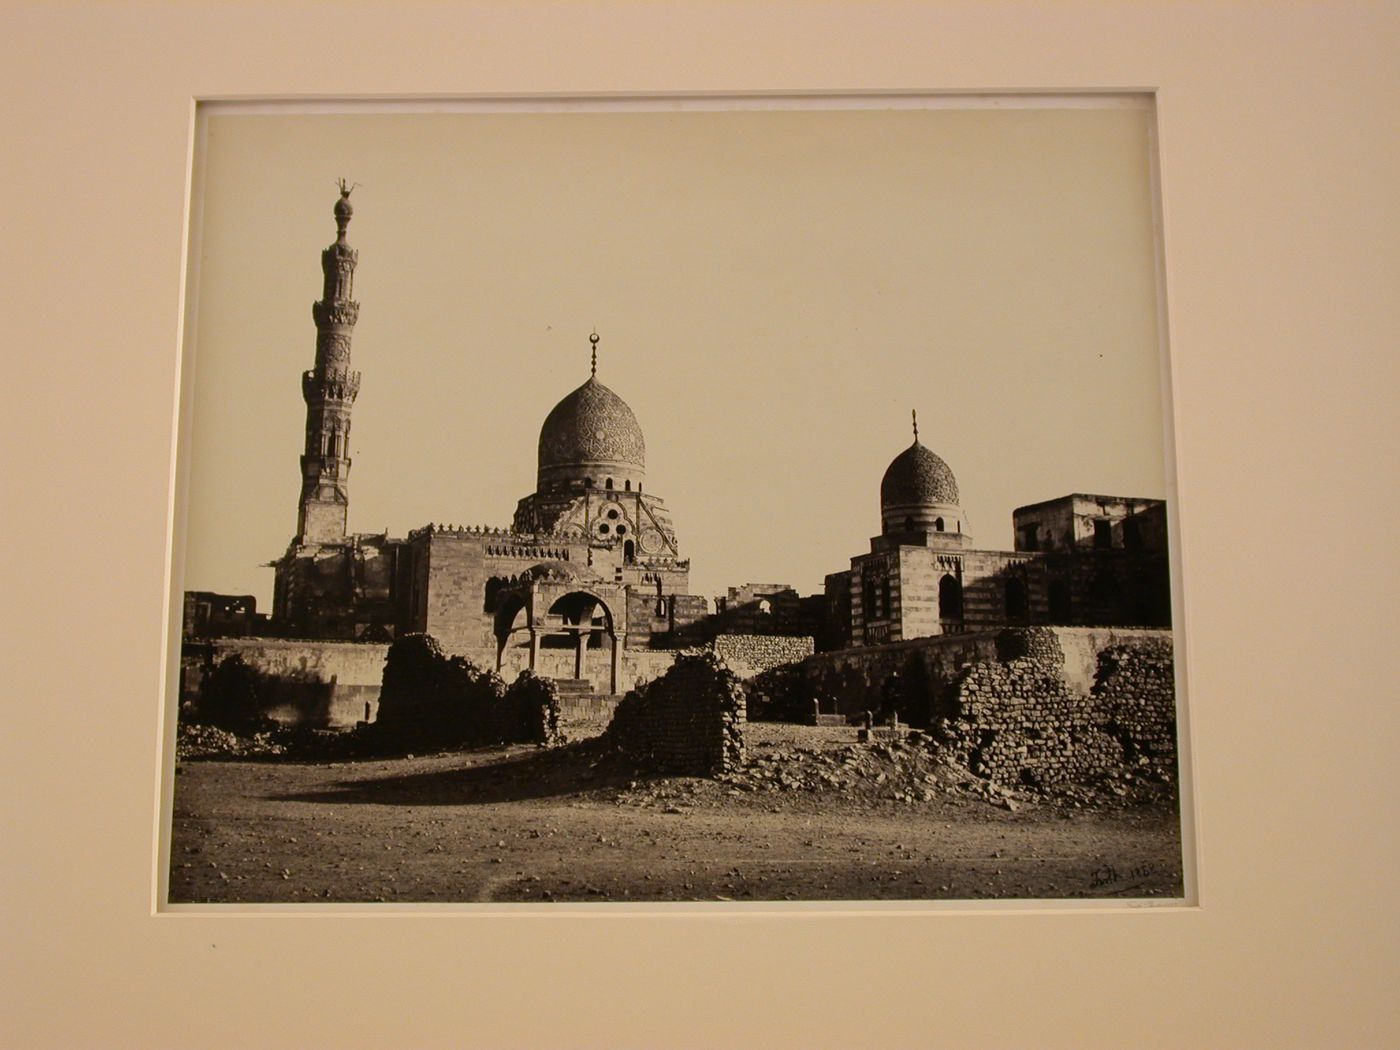 The mosque of Kait Bey, Cairo, Egypt